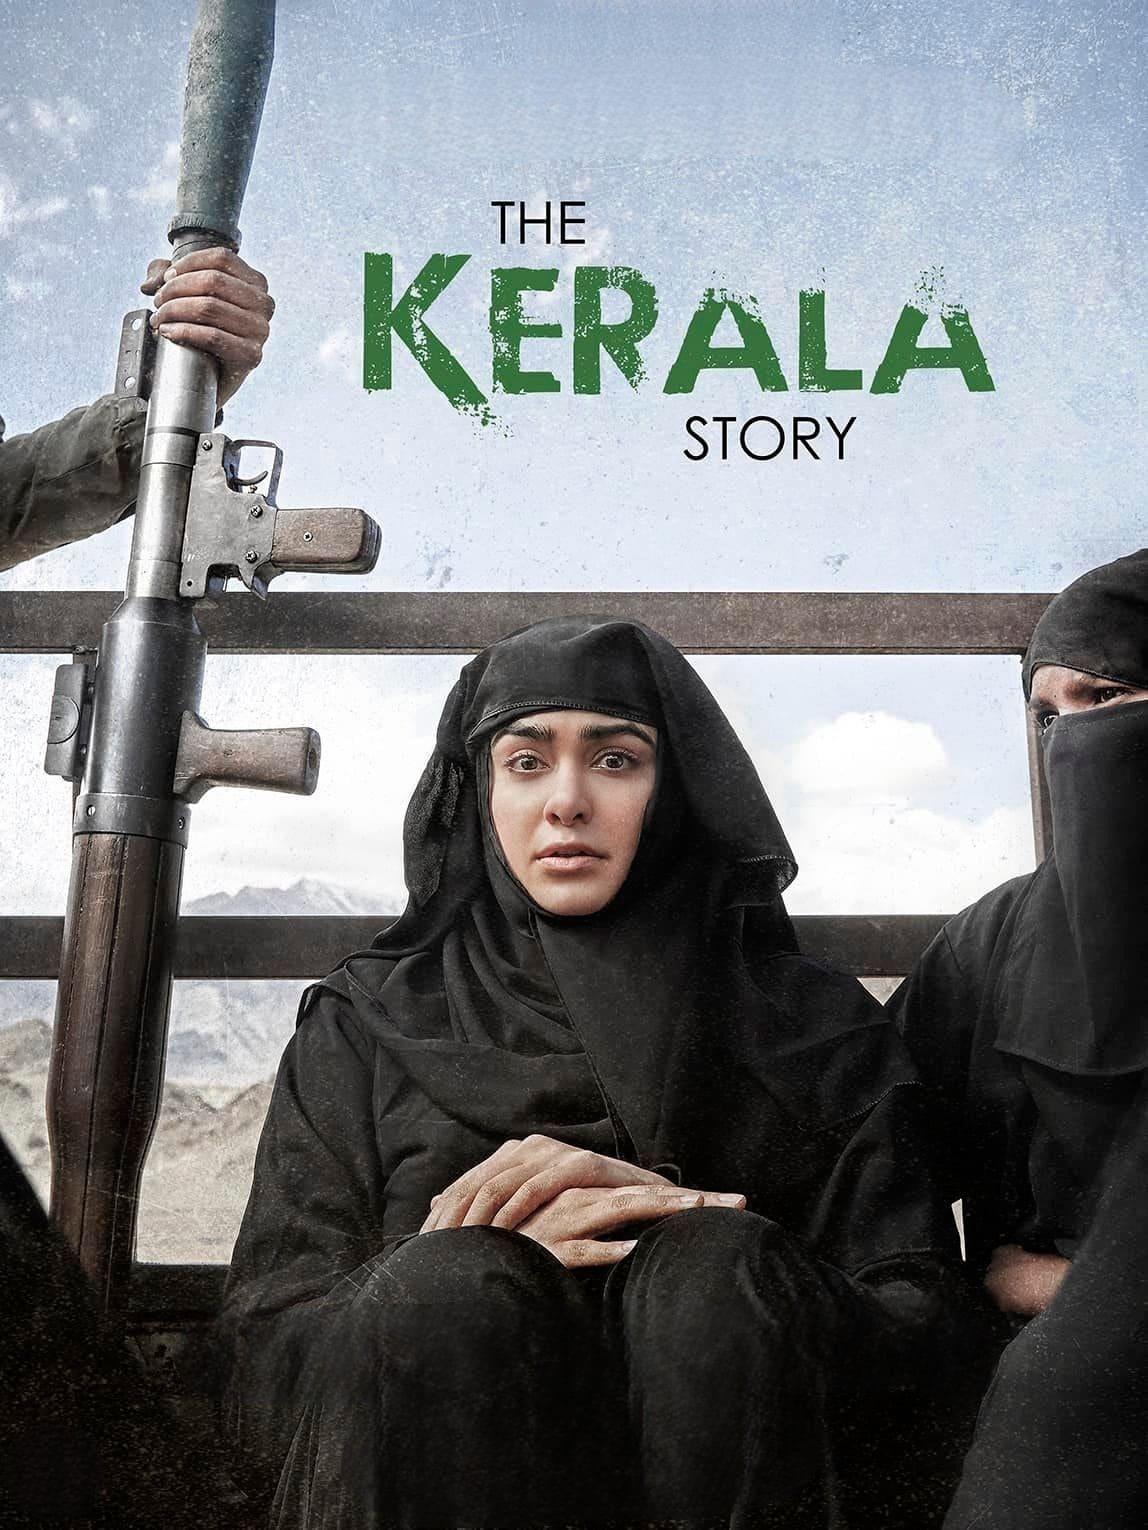 The Kerala Story poster